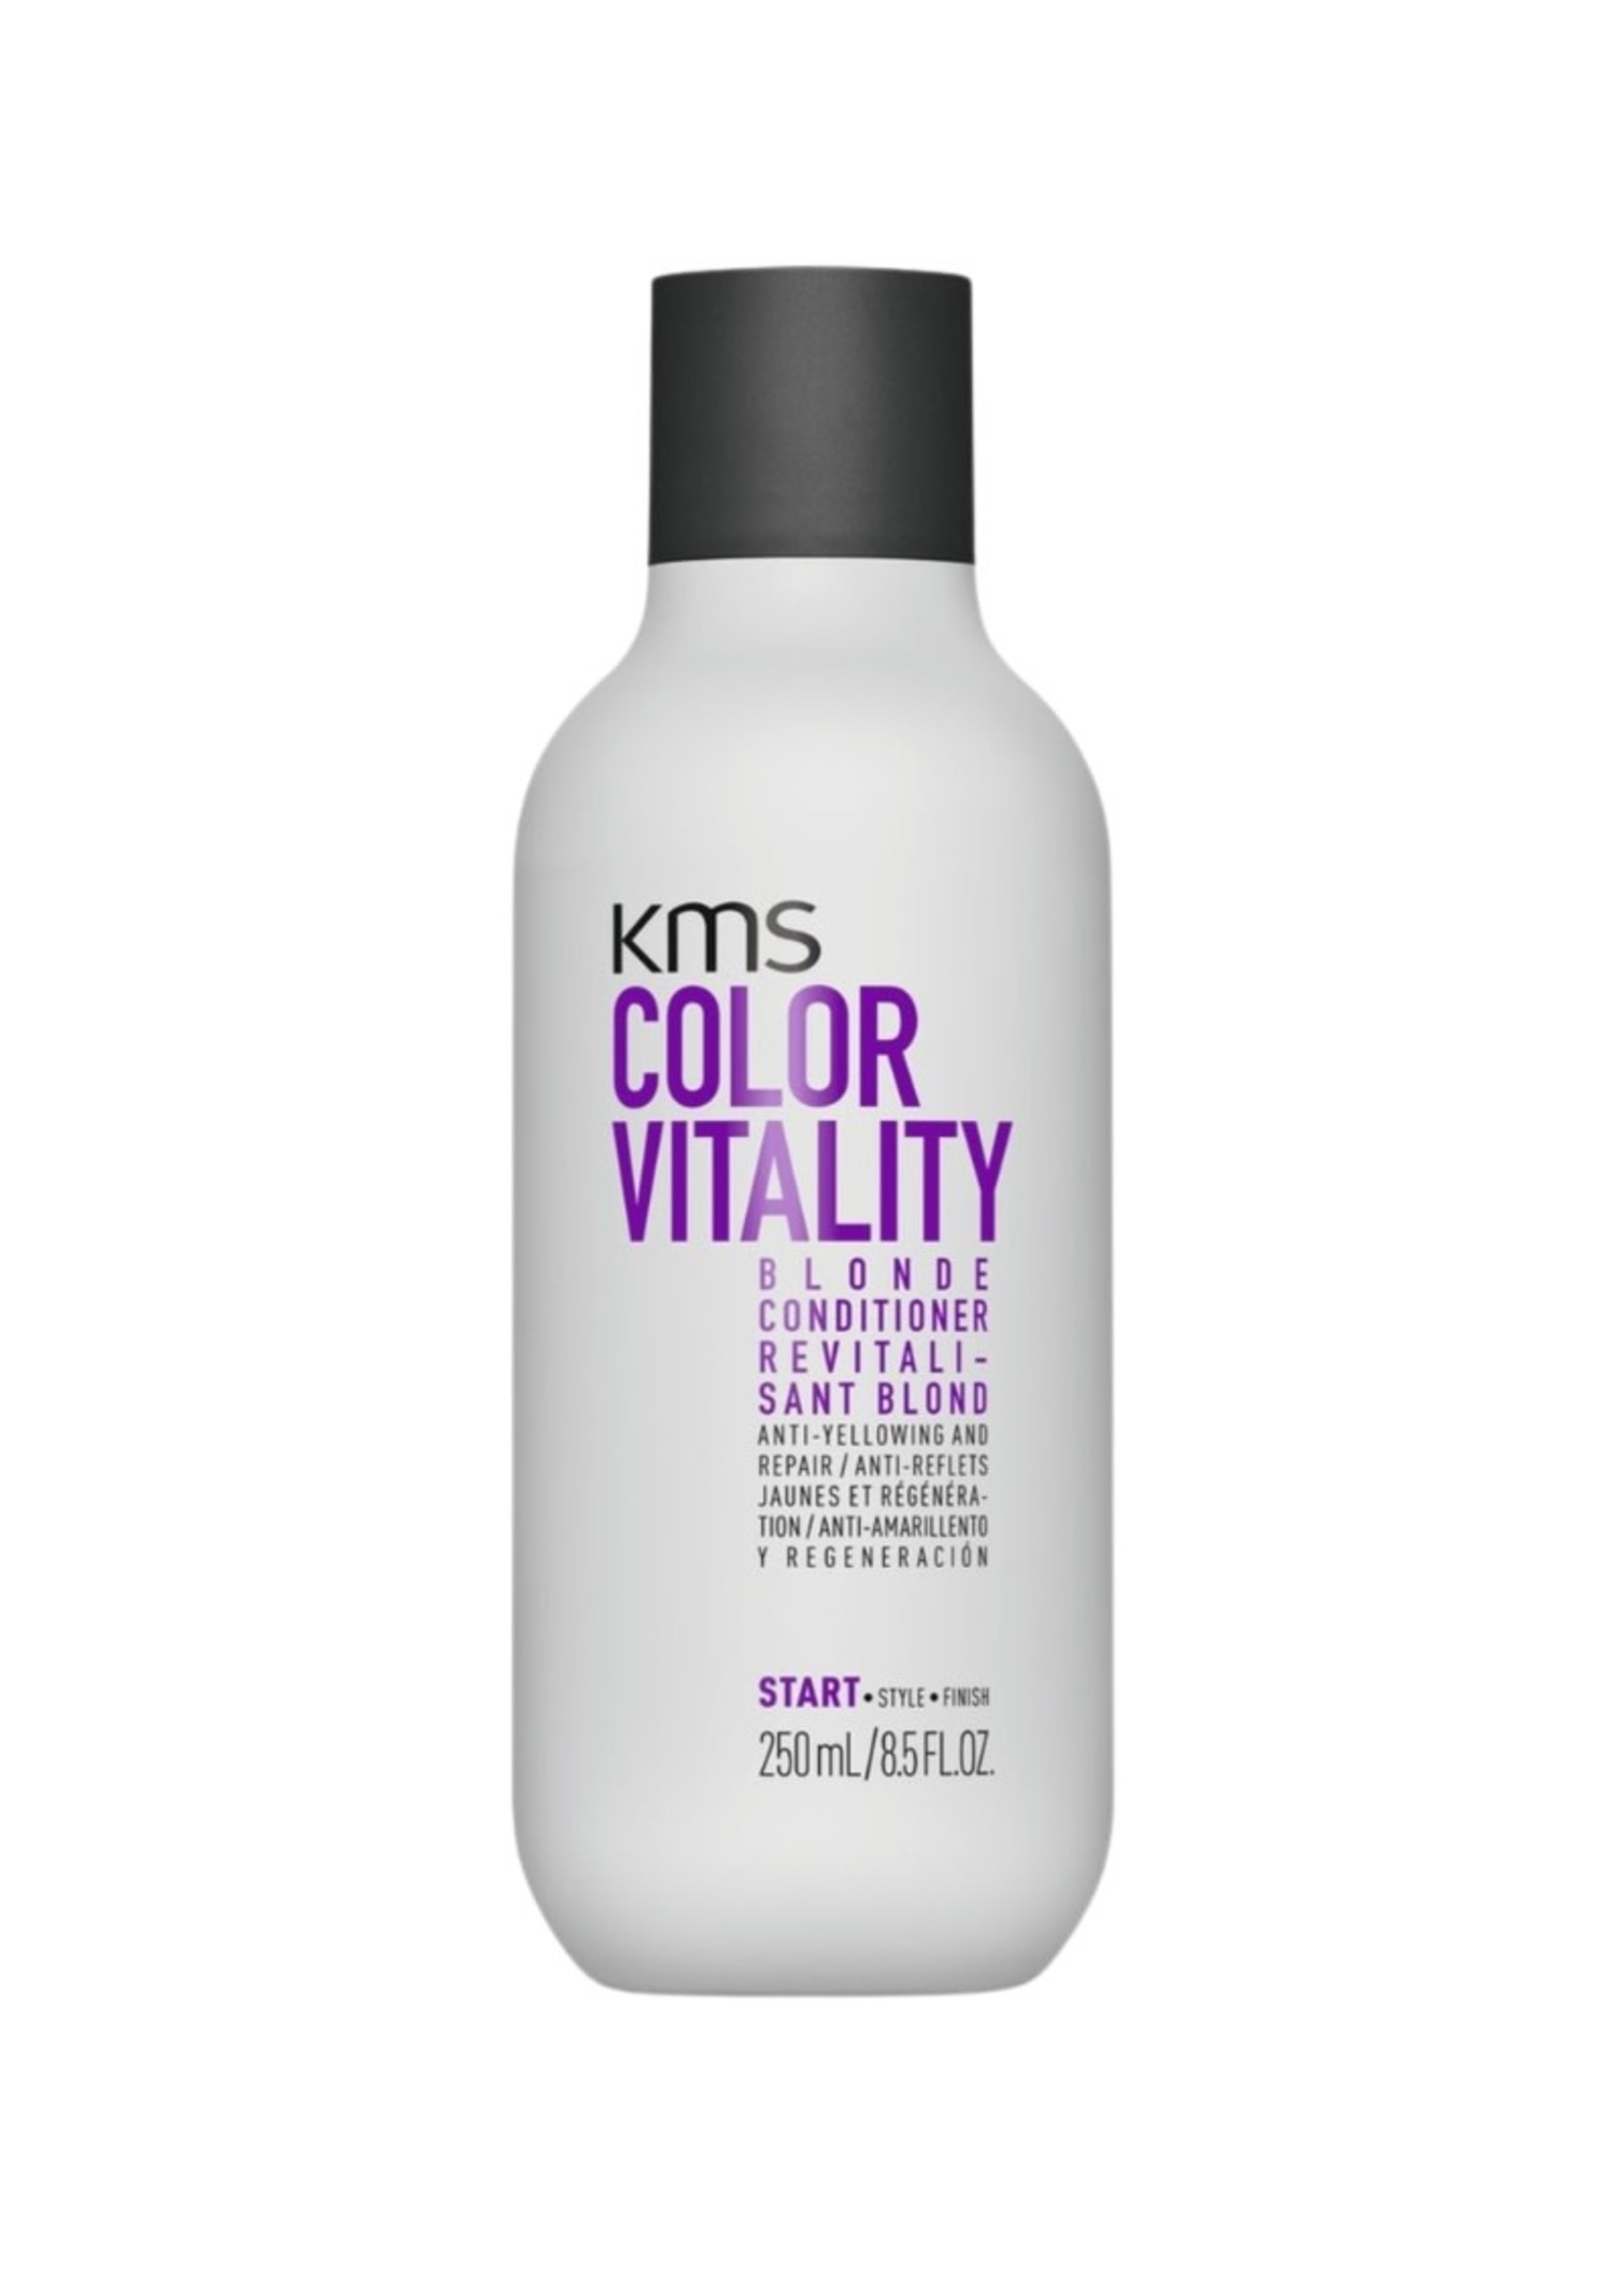 KMS KMS Colorvitality Blonde Conditioner 250ml